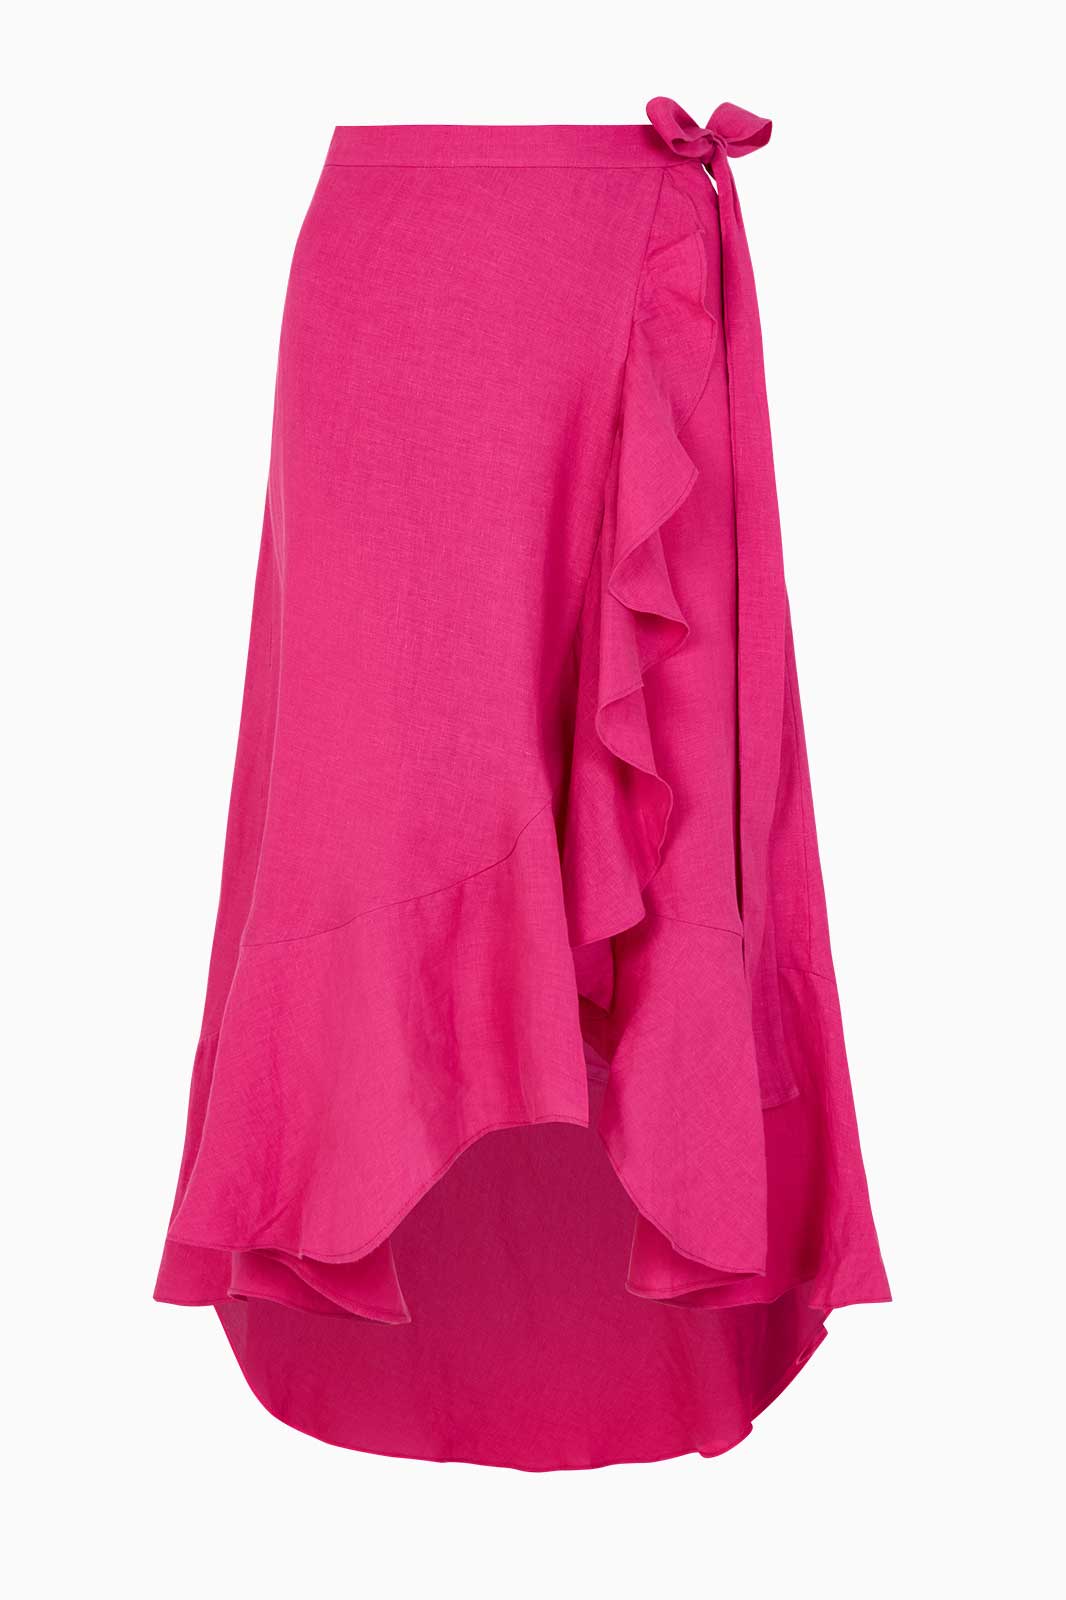 arkitaip Skirts The Catalina Linen Wrap Skirt in hot pink